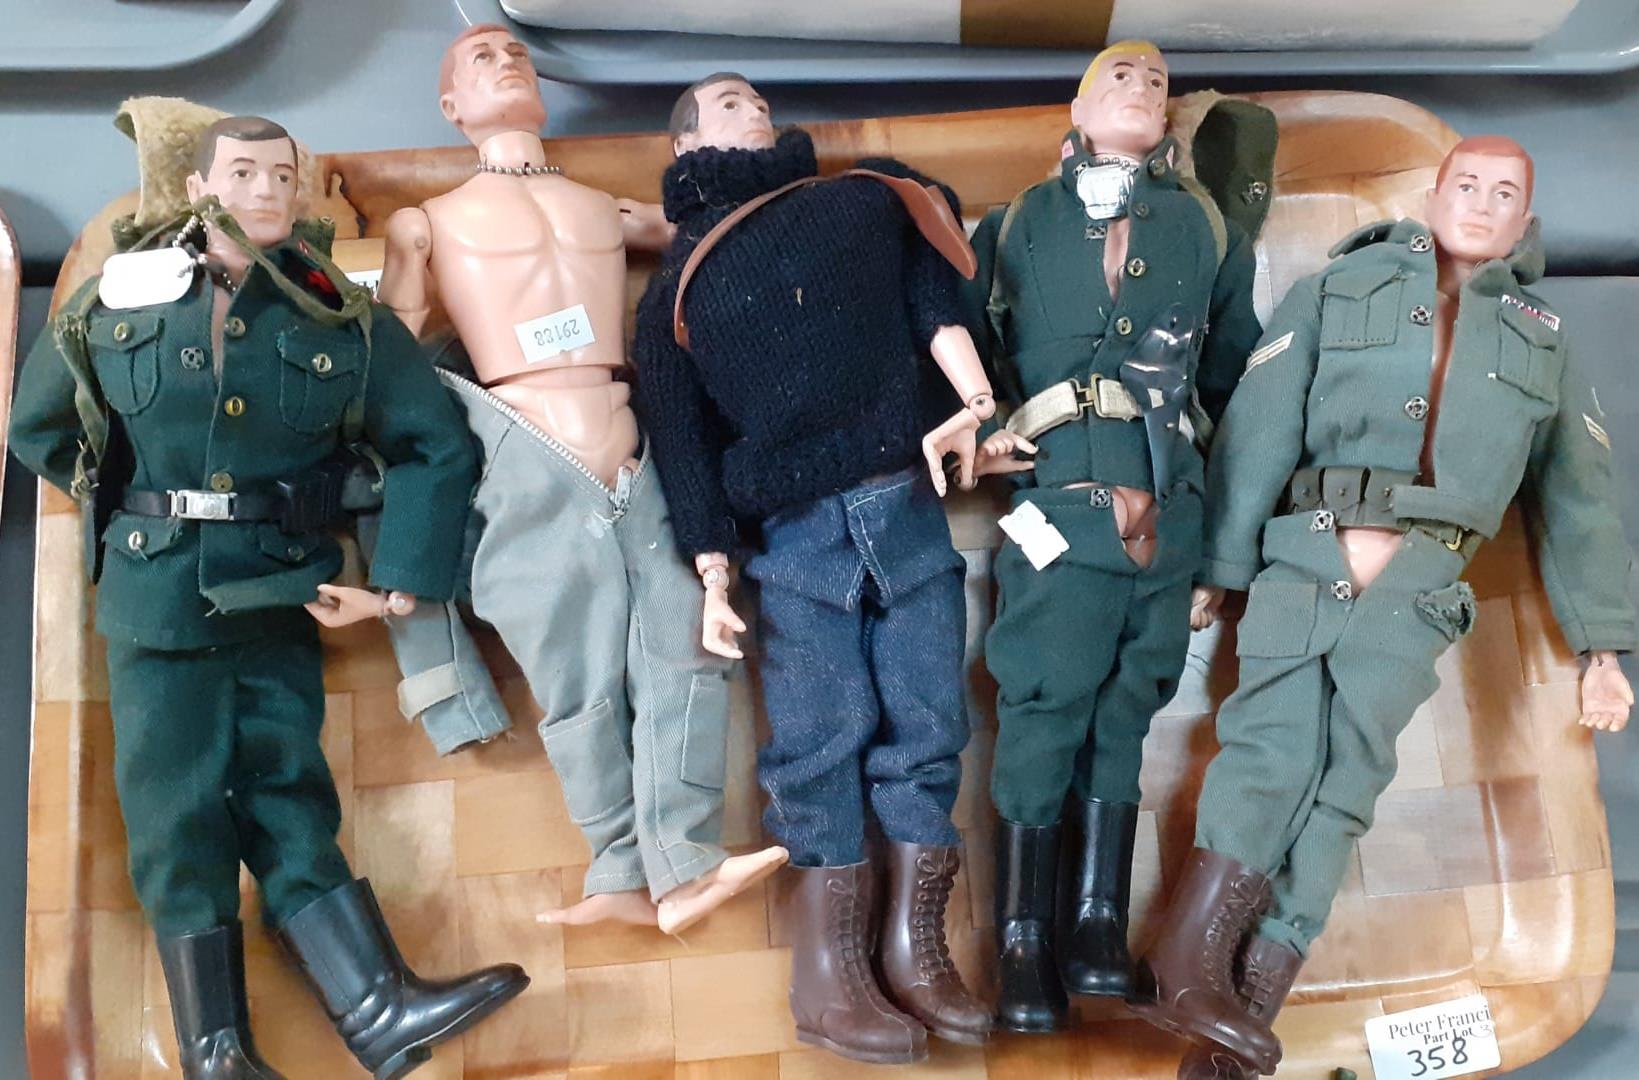 Collection of Action man items to include: figurines in clothing, helmets, boots, guns, other - Image 2 of 3